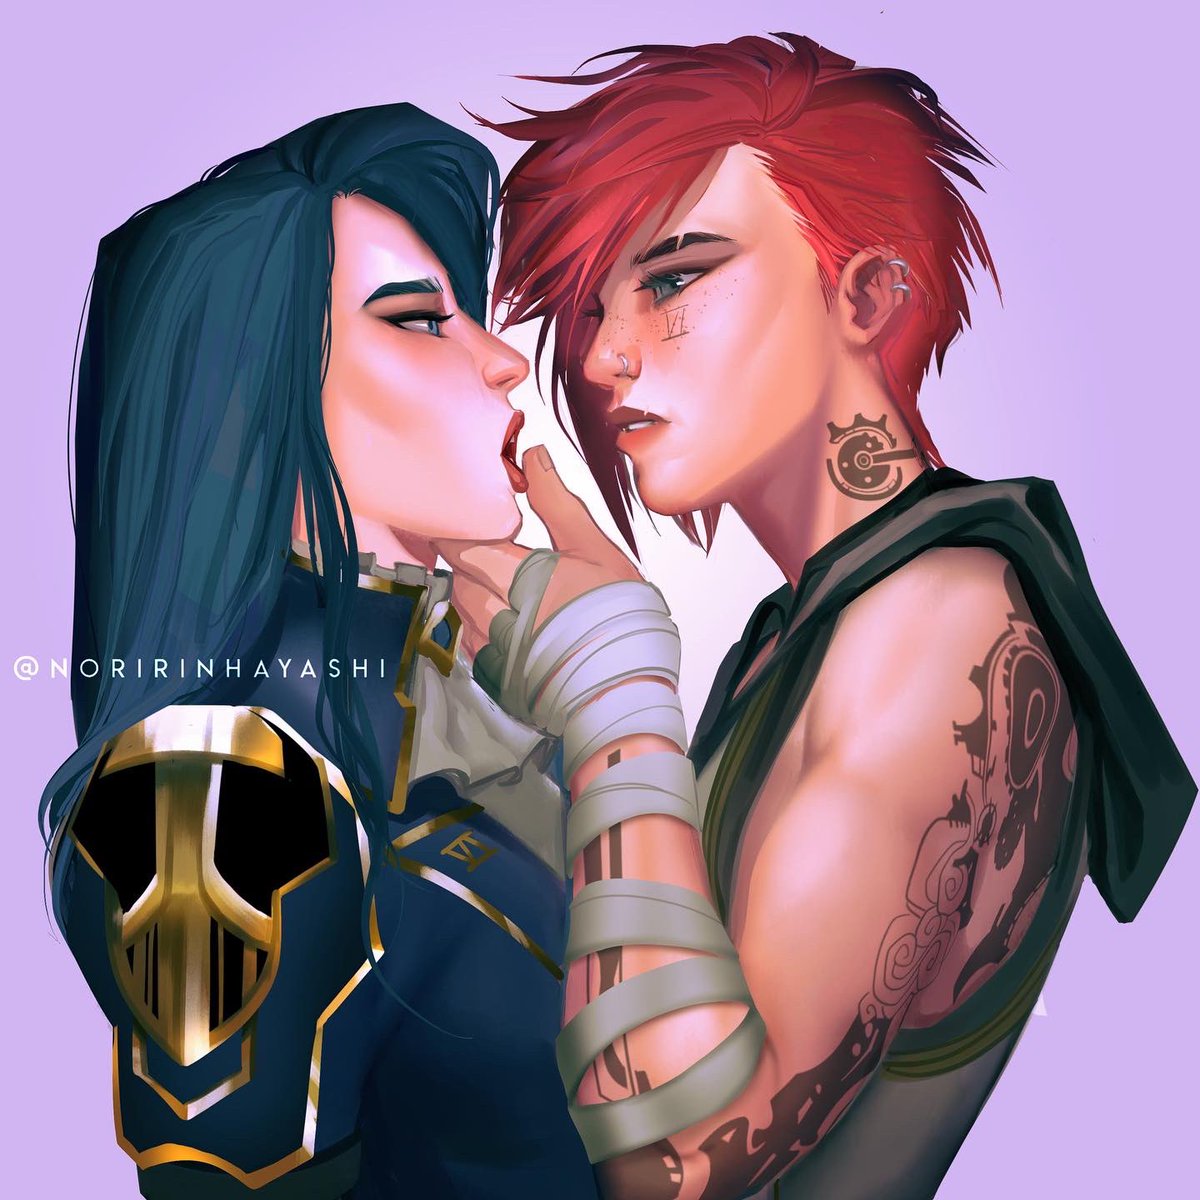 It’s #lesbianvisibilityweek so here we go with some sapphic art! ❤️🧡🤍🩷